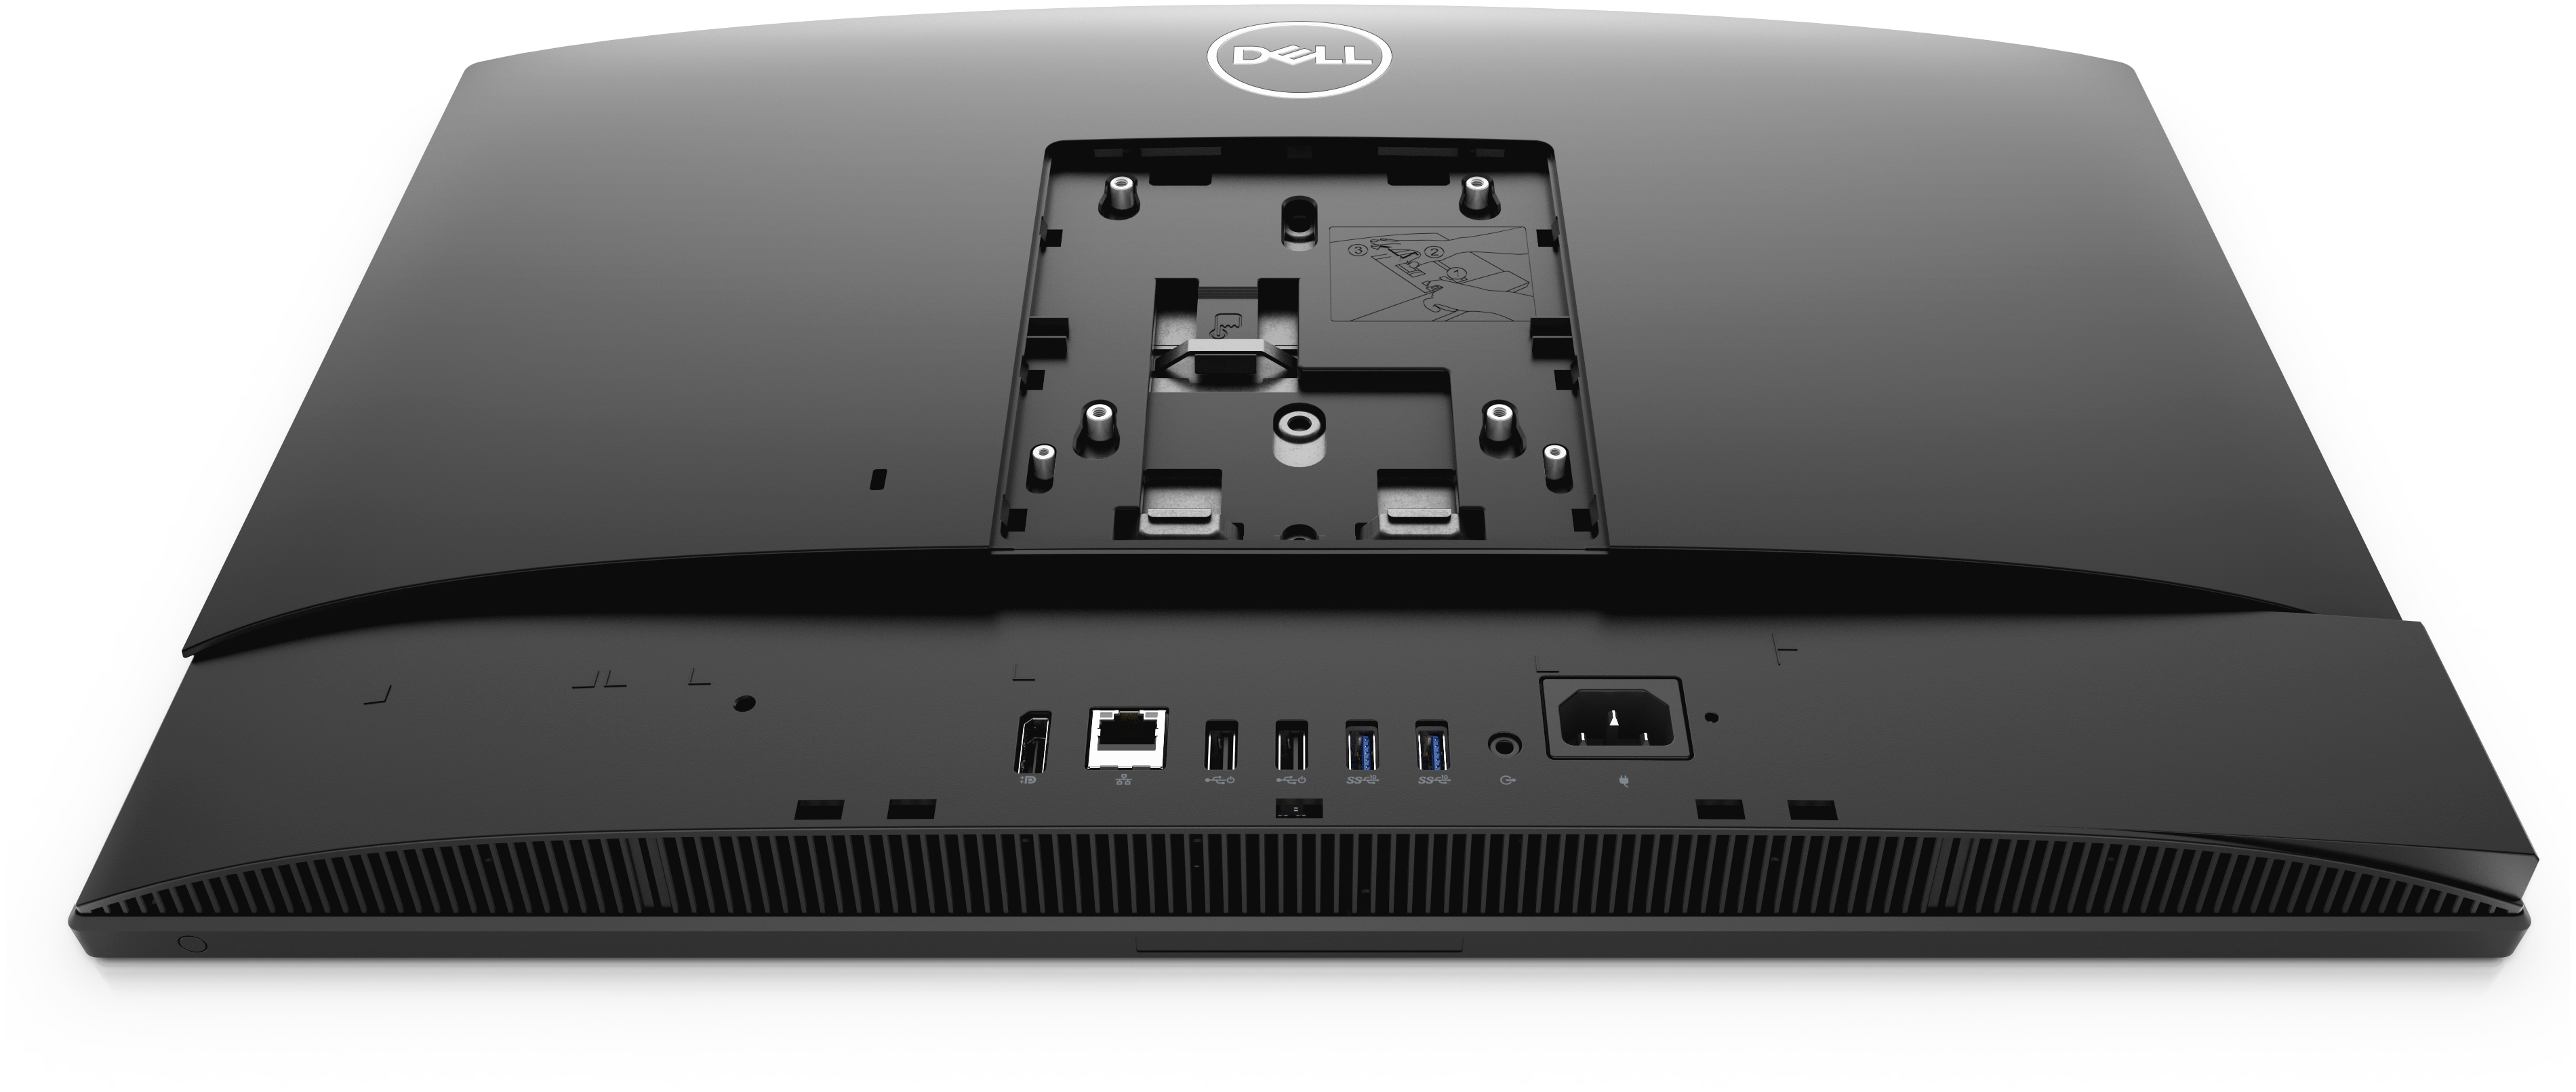 Dell - I5 All in One Pc